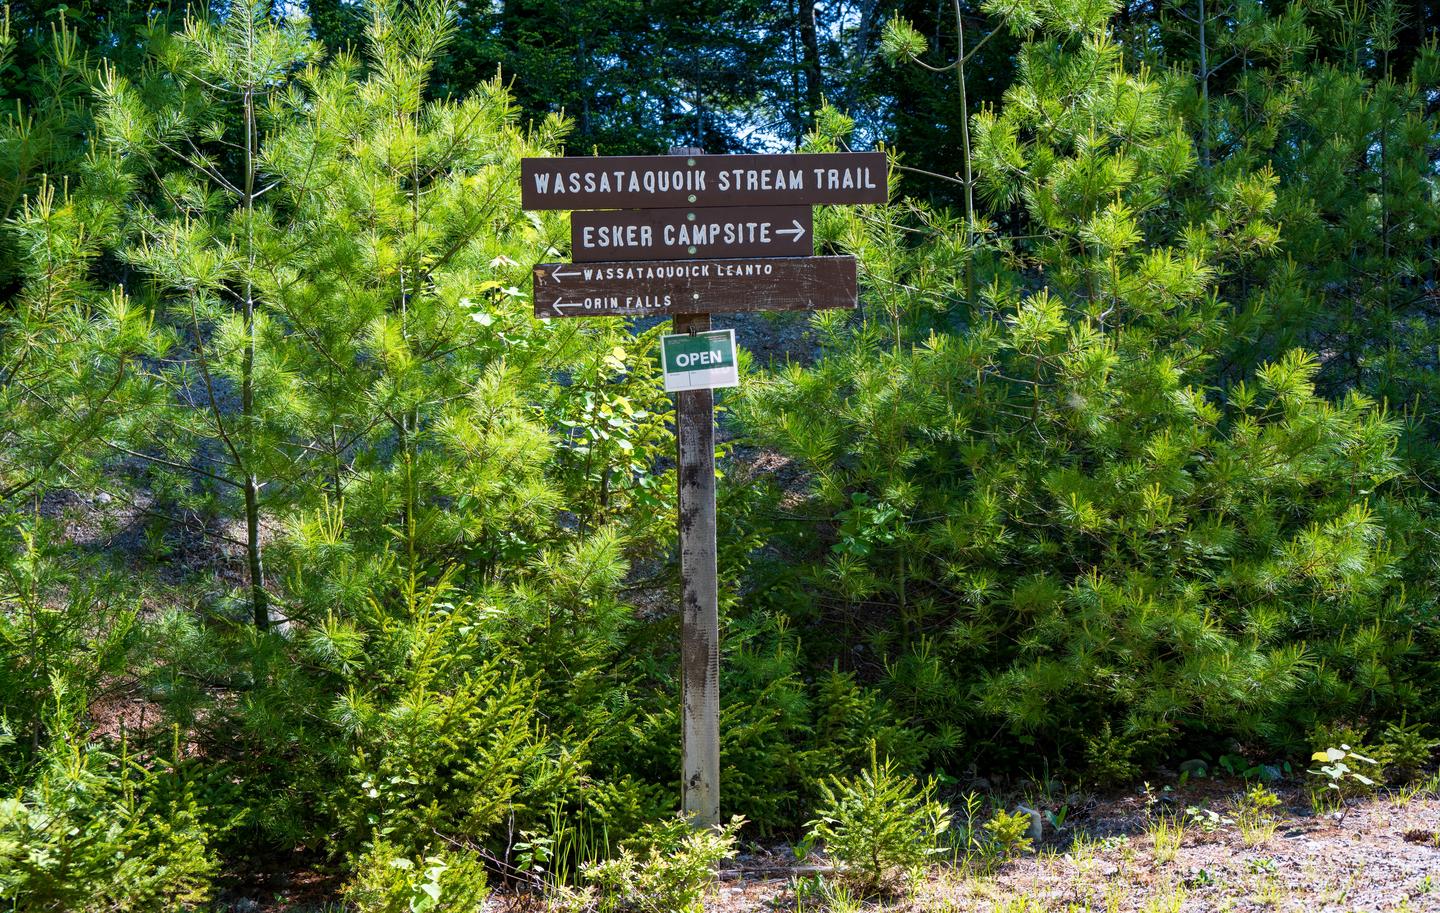 A brown wooden post that has three separate brown horizontal wooden signs with place names engraved with white paint affixed at the top of the post. The first sign at the top shows Wassataquoik Stream Trail, the second wooden sign shows Esker Campsite with an arrow pointing tot he right, the bottom sign has Wassataqoik LeanTo and Orin Falls with arrows pointed to the left. Behind the sign are evergreen trees with the blue sky showing through branches.A trail sign that points towards Esker Campsite. Reservation postings can be found here.